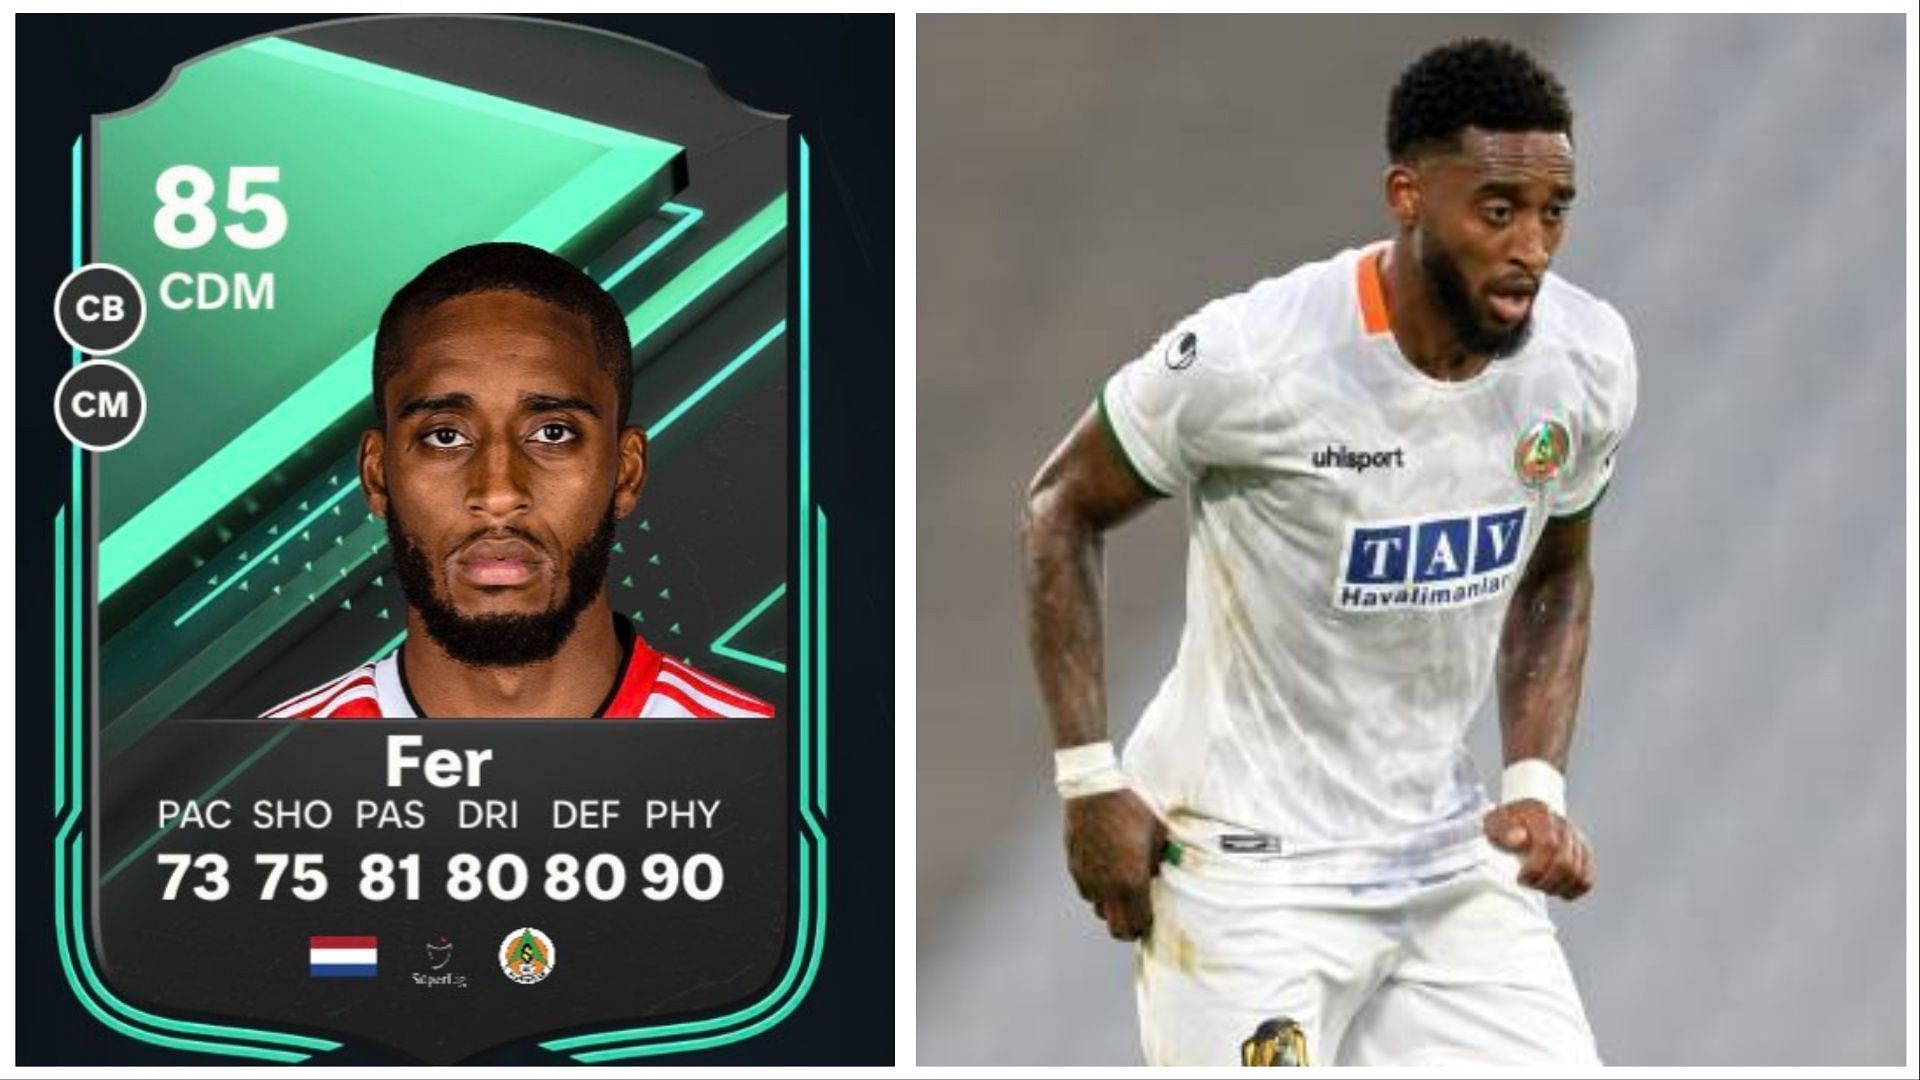 The Leroy Fer SBC is now live (Images via EA Sports and Getty Images)